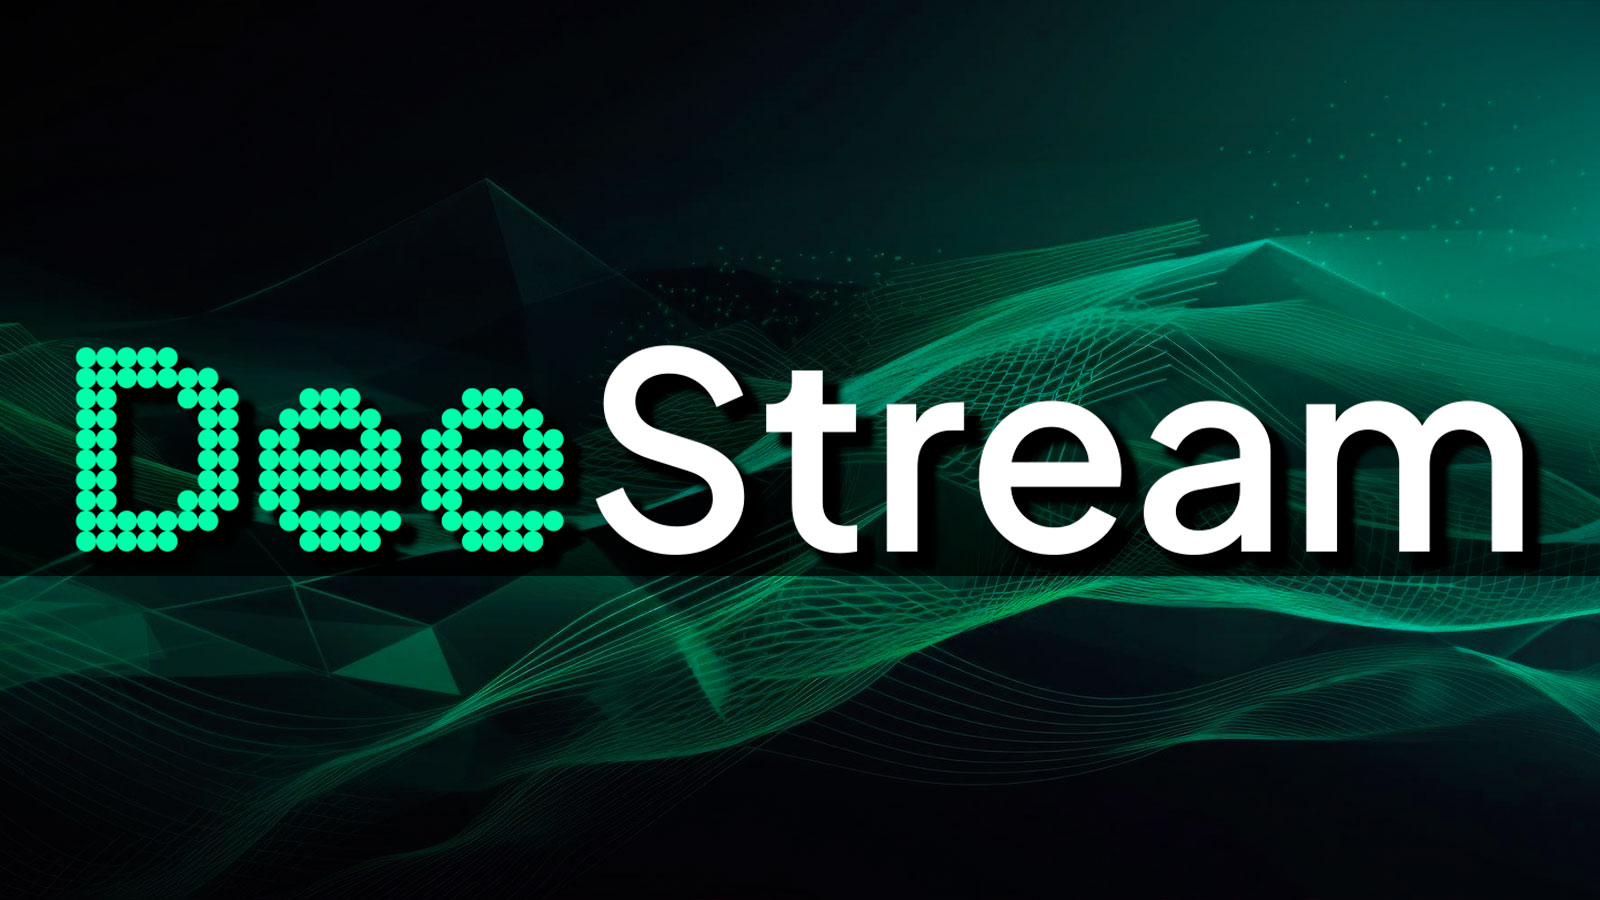 USD Coin (USDC) & Filecoin (FIL) Investment Rush Amid Bullrun, DeeStream (DST) On Its Way to Rival Big Streaming